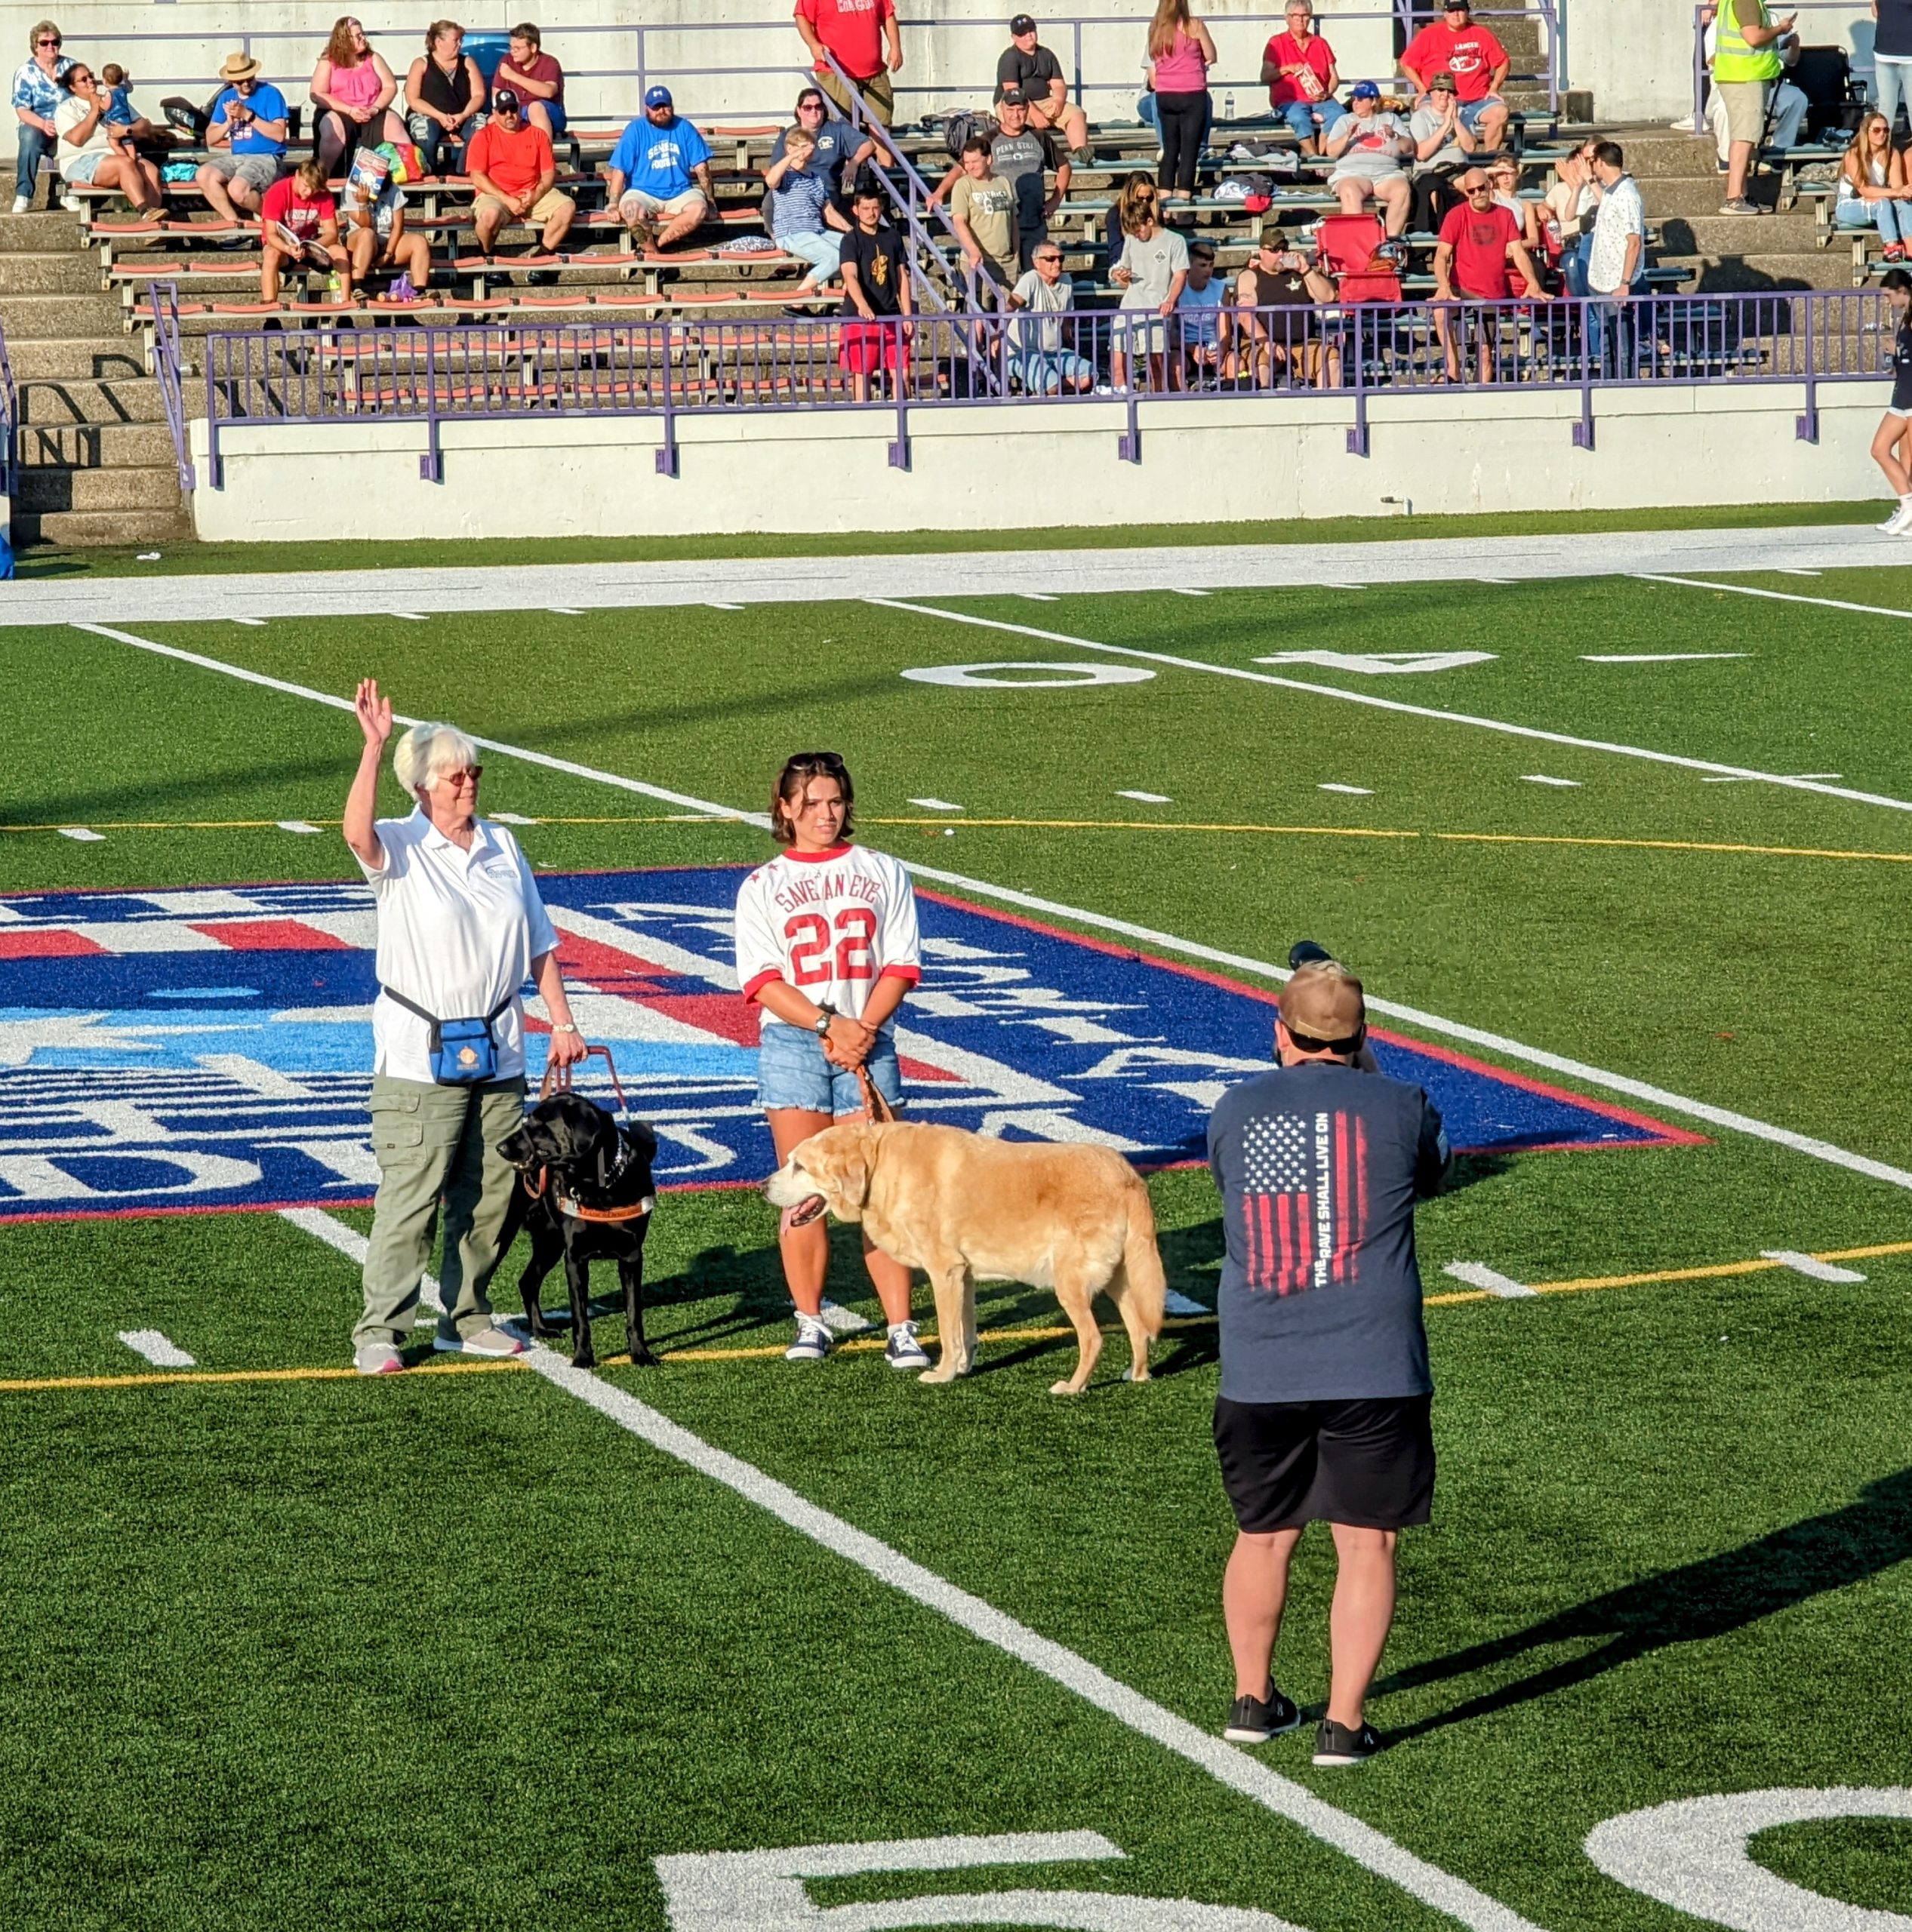 People with dogs in a football field.